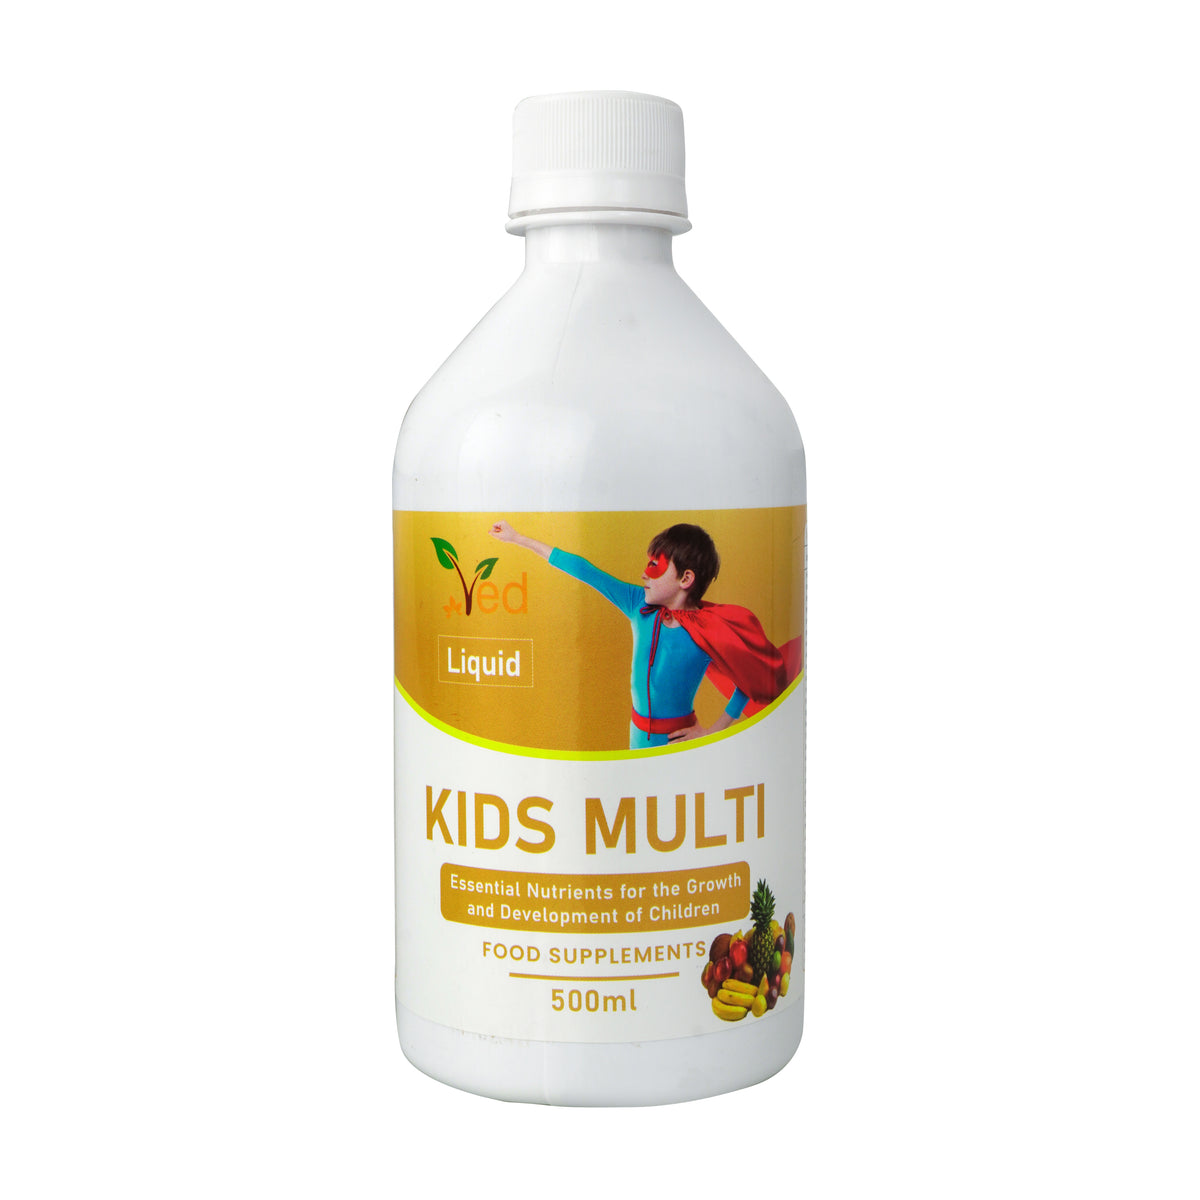 Ved Kids Multi Immune Support for Children, Natural Mix Fruit Flavour, 500ml(33 Days Supply).